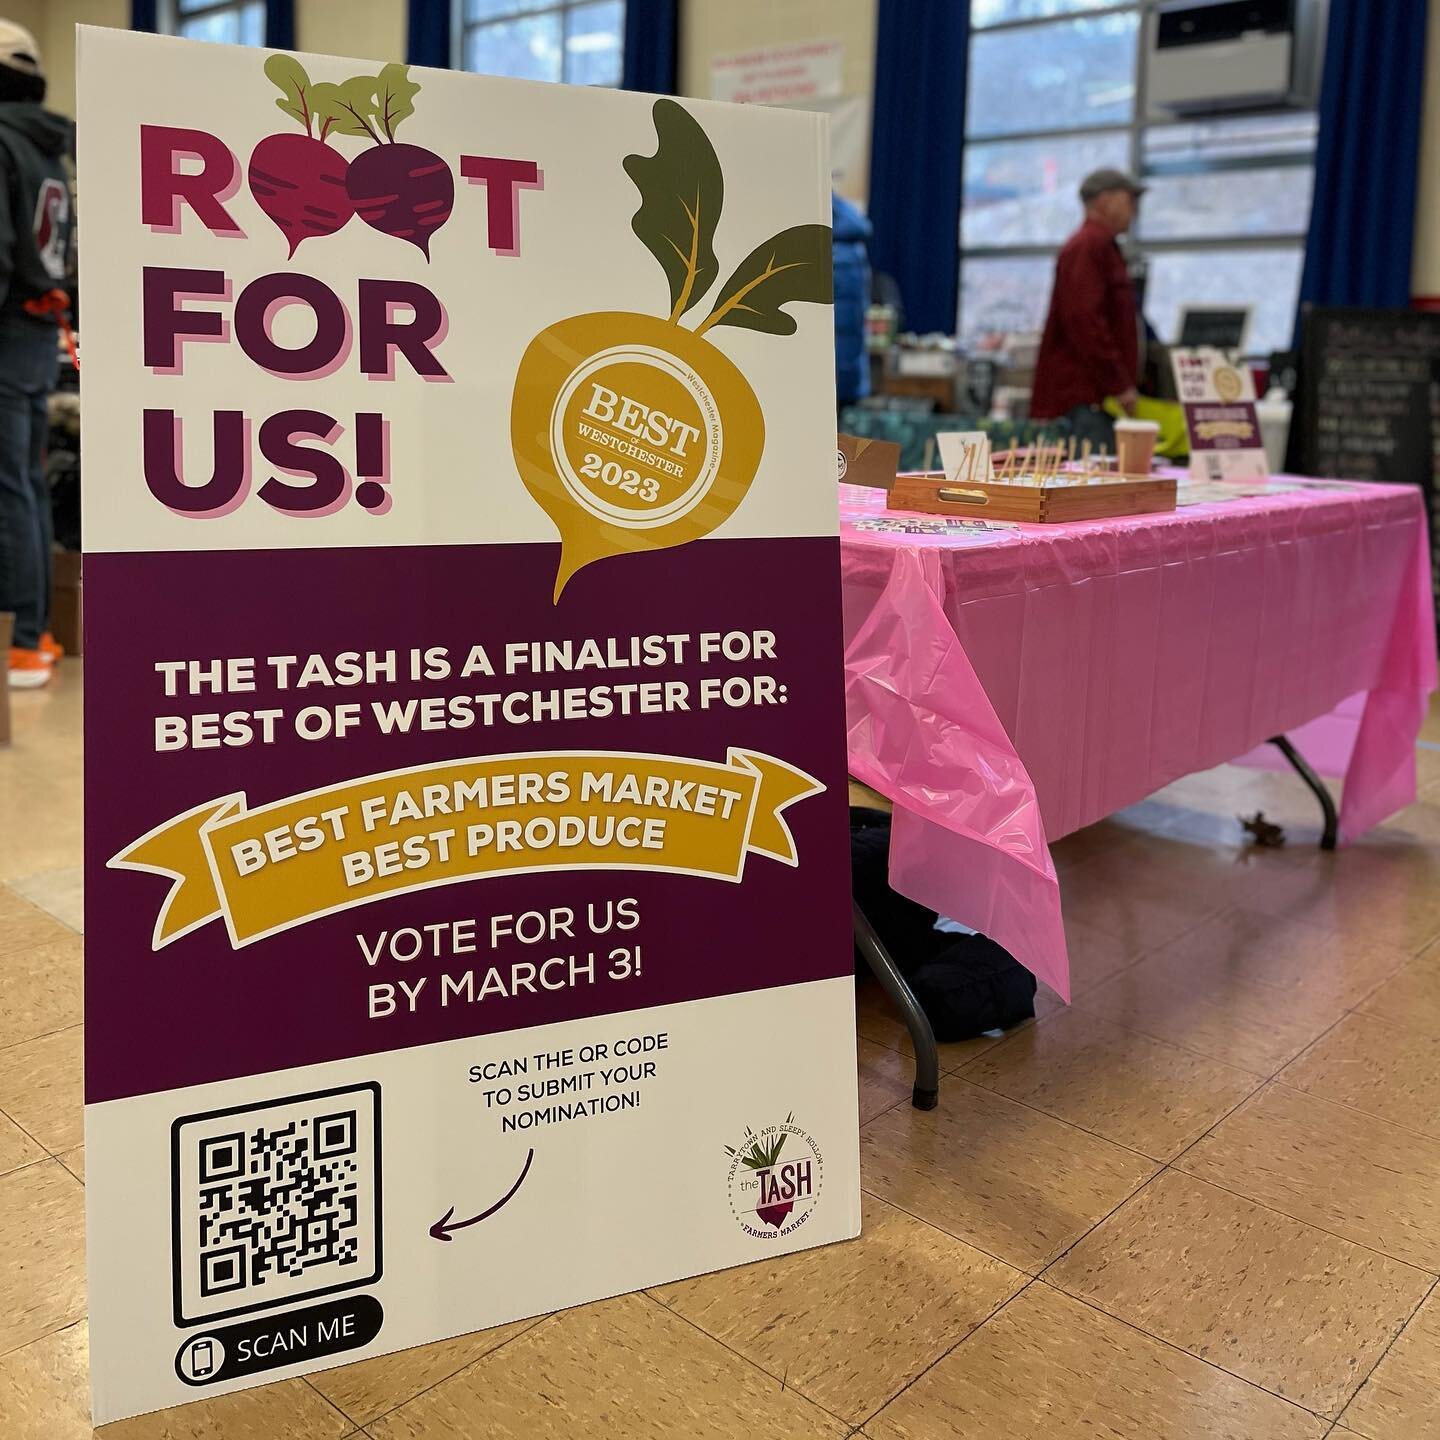 ROOT FOR US! Stop by for samples and stickers today through 12:30 and learn why you should vote 🌟 for us for the Best Farmers Market and Best Produce in Westchester! 💜